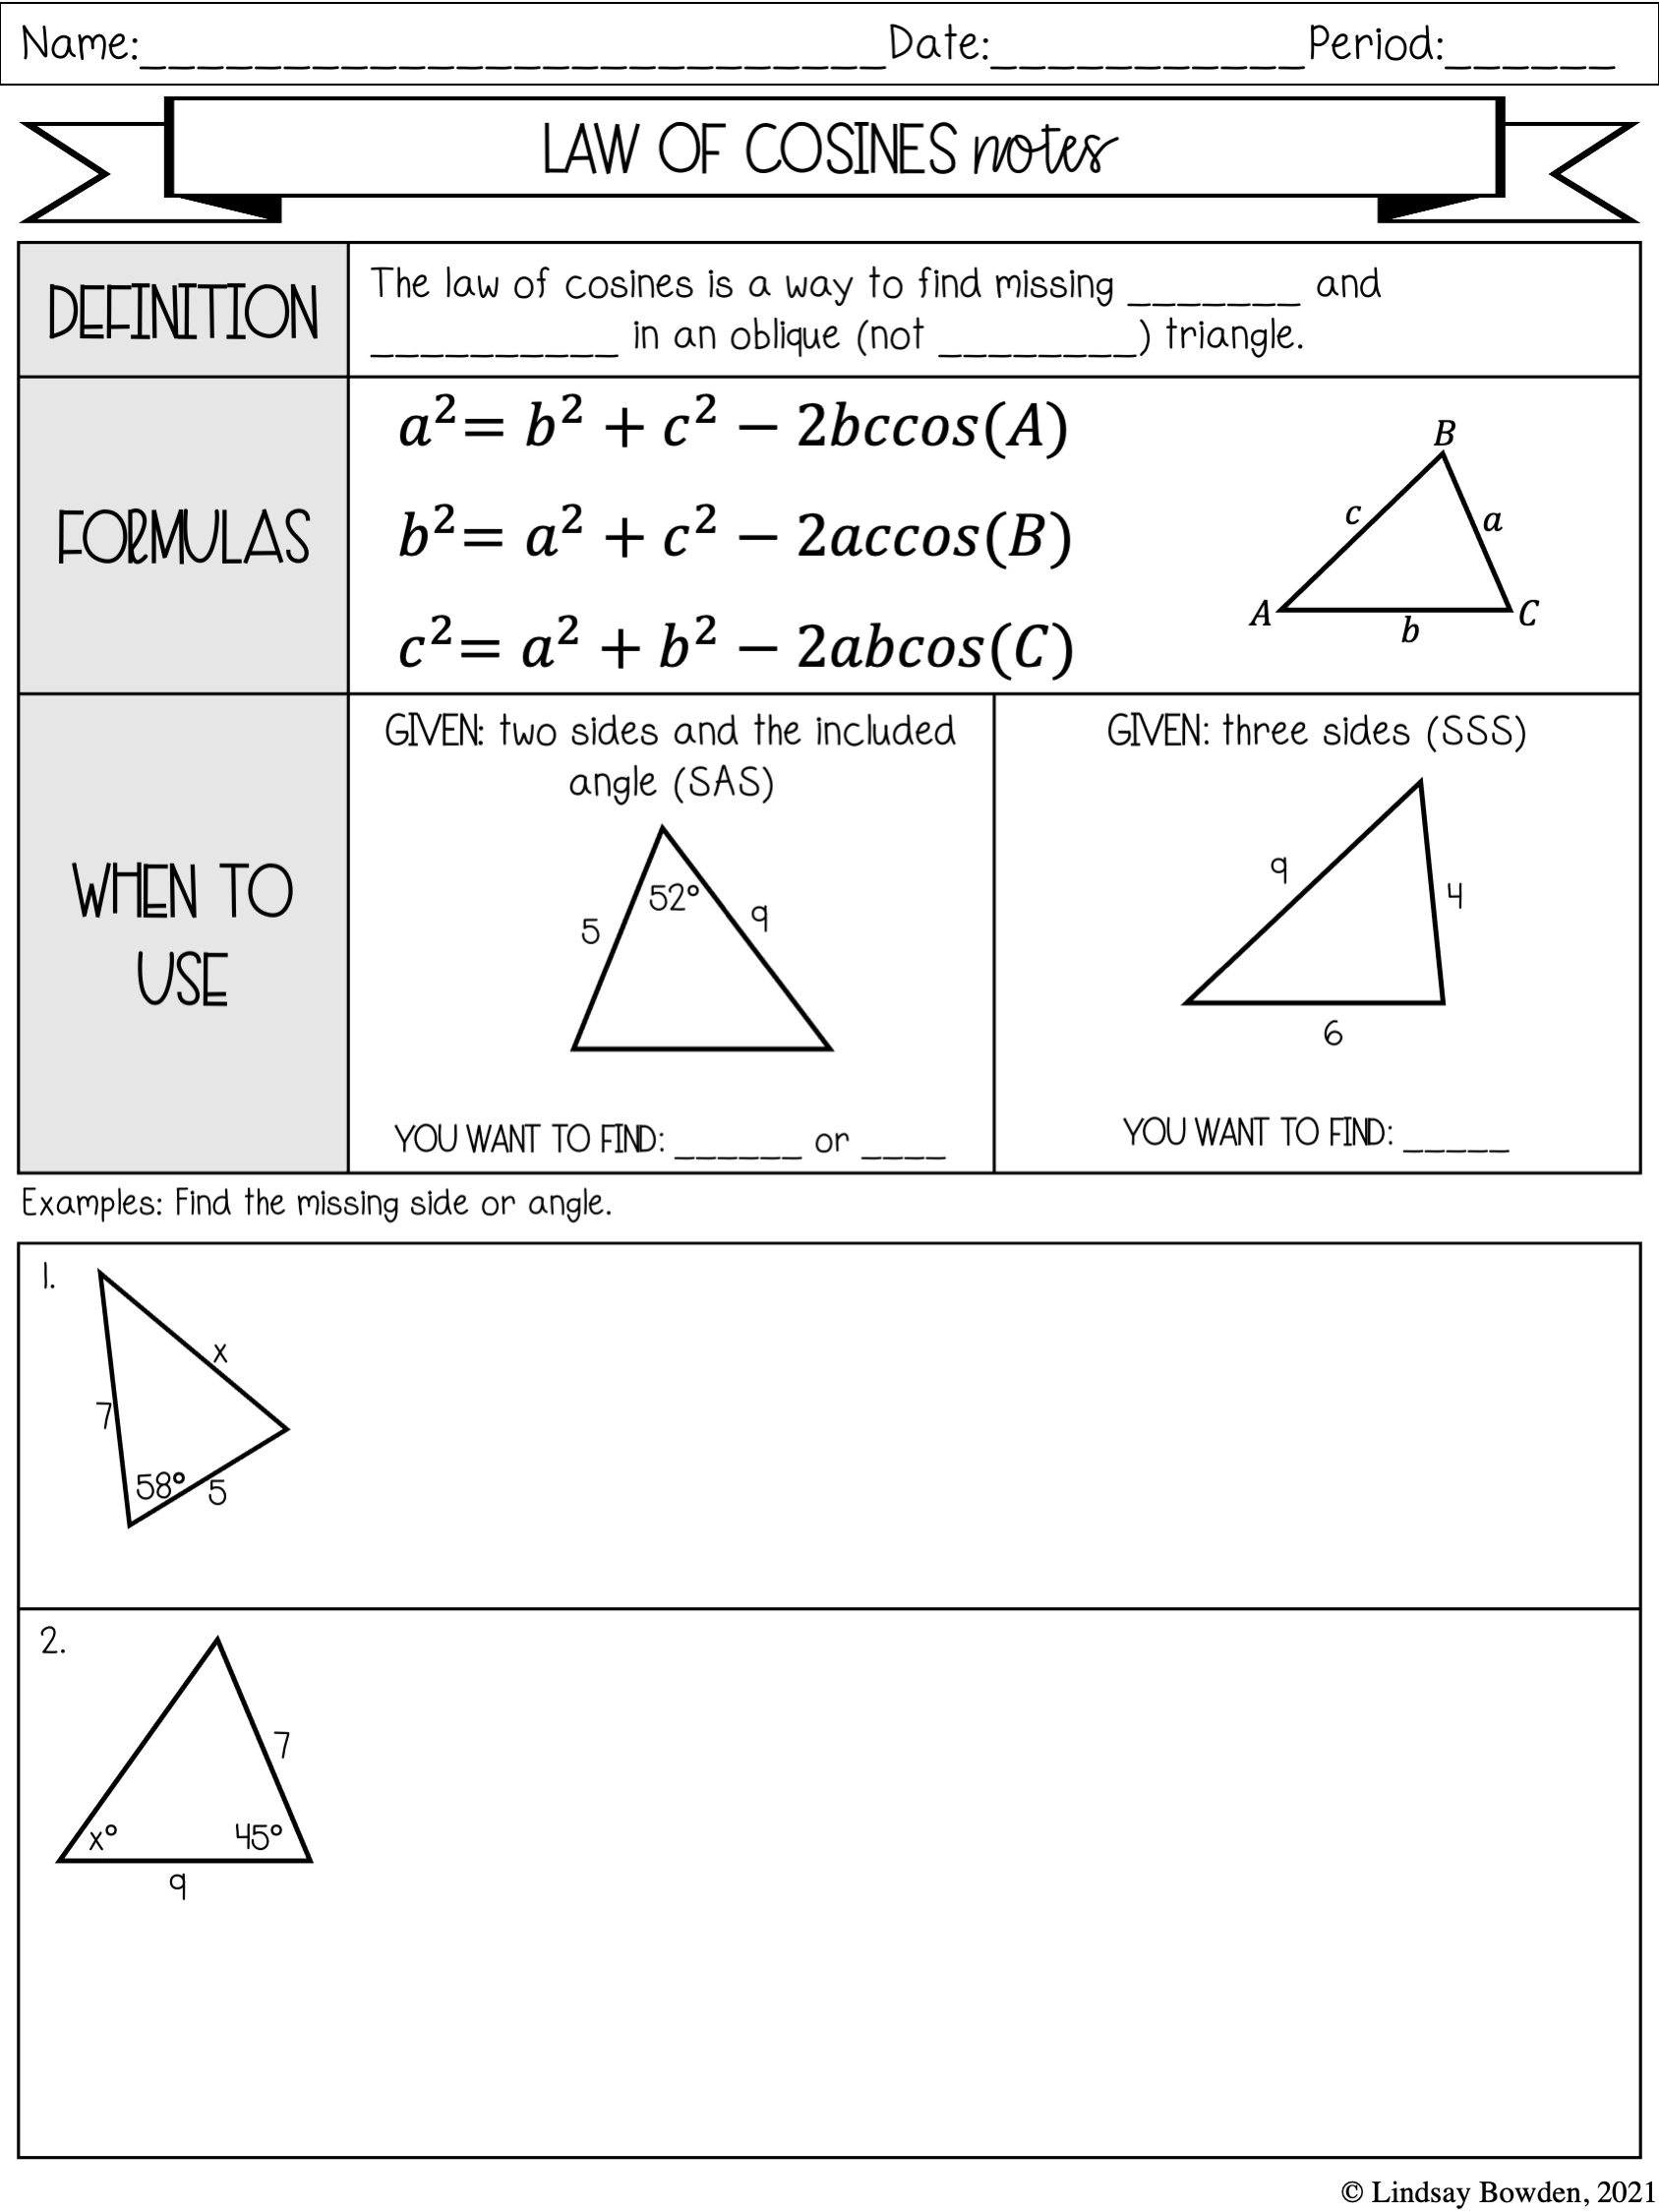 Law of Sines and Cosines Notes and Worksheets - Lindsay Bowden With Law Of Sines Worksheet Answers